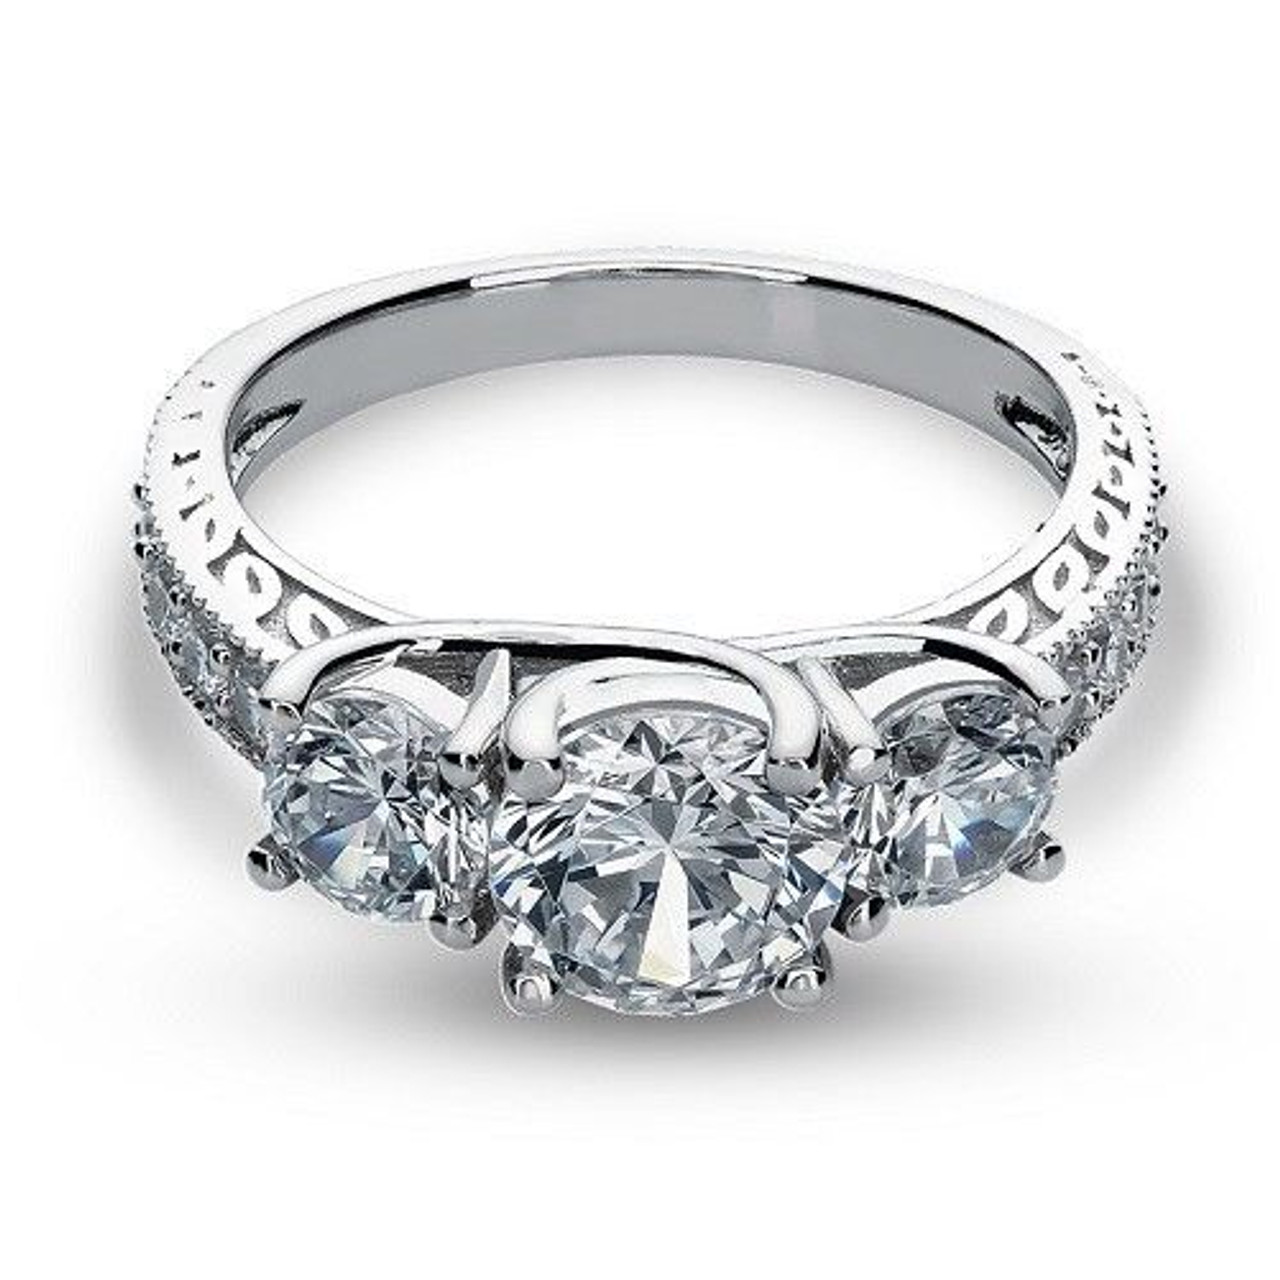 2.90Ct White Radiant Cut Halo Diamond Engagement Ring in Solid 14k White Gold